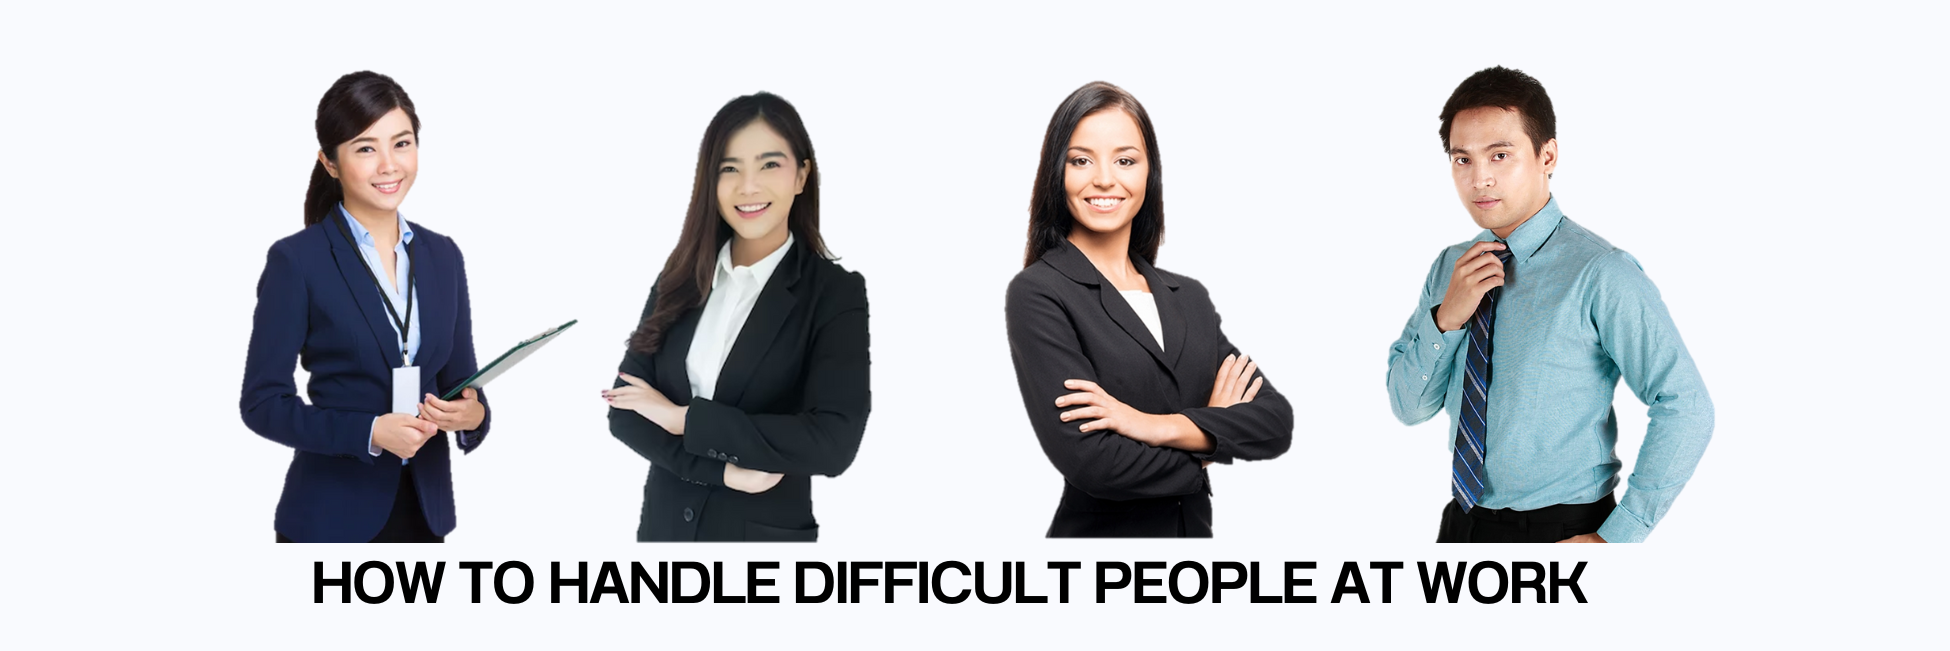 How to Handle Difficult People at Work แบนเนอร์หน้าใน.png (622 KB)